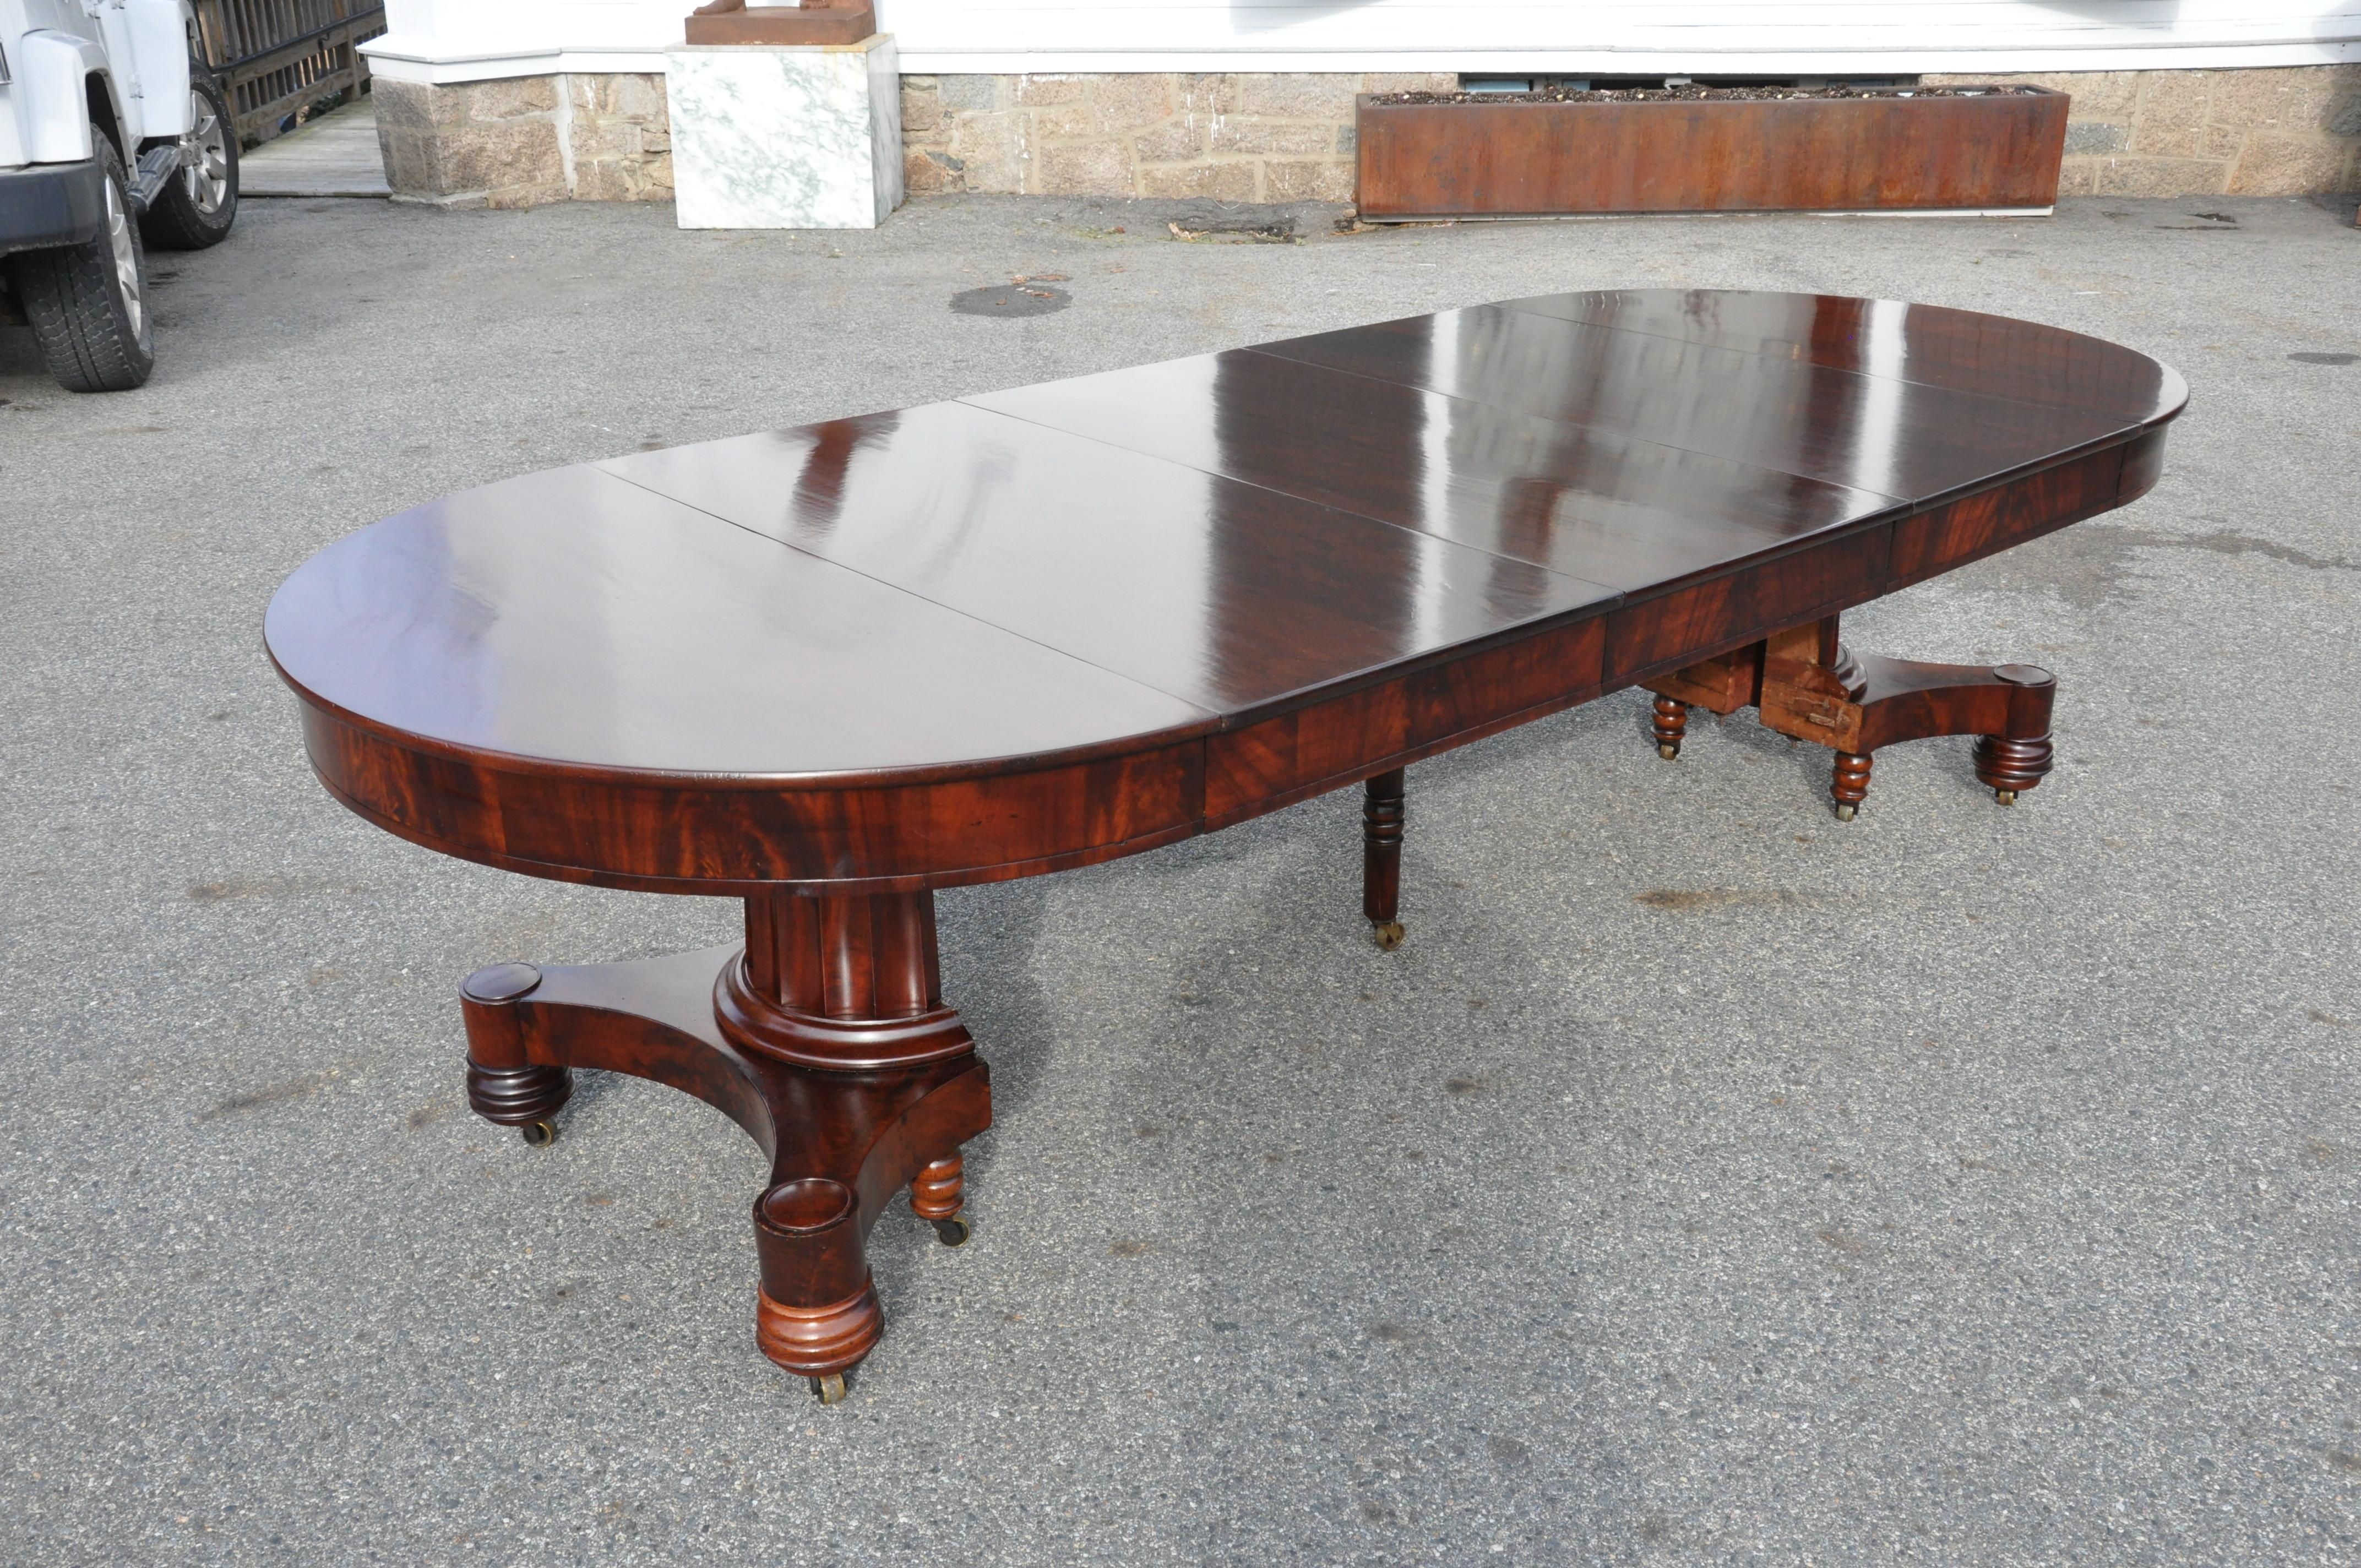 Period early 19th century round dining table with three leaves for expansion
--Tasteful fluted column pedestal with original feet. Crotch grain mahogany and solid mahogany top.
Three leaves with aproned sides. Boston Empire or late Federal